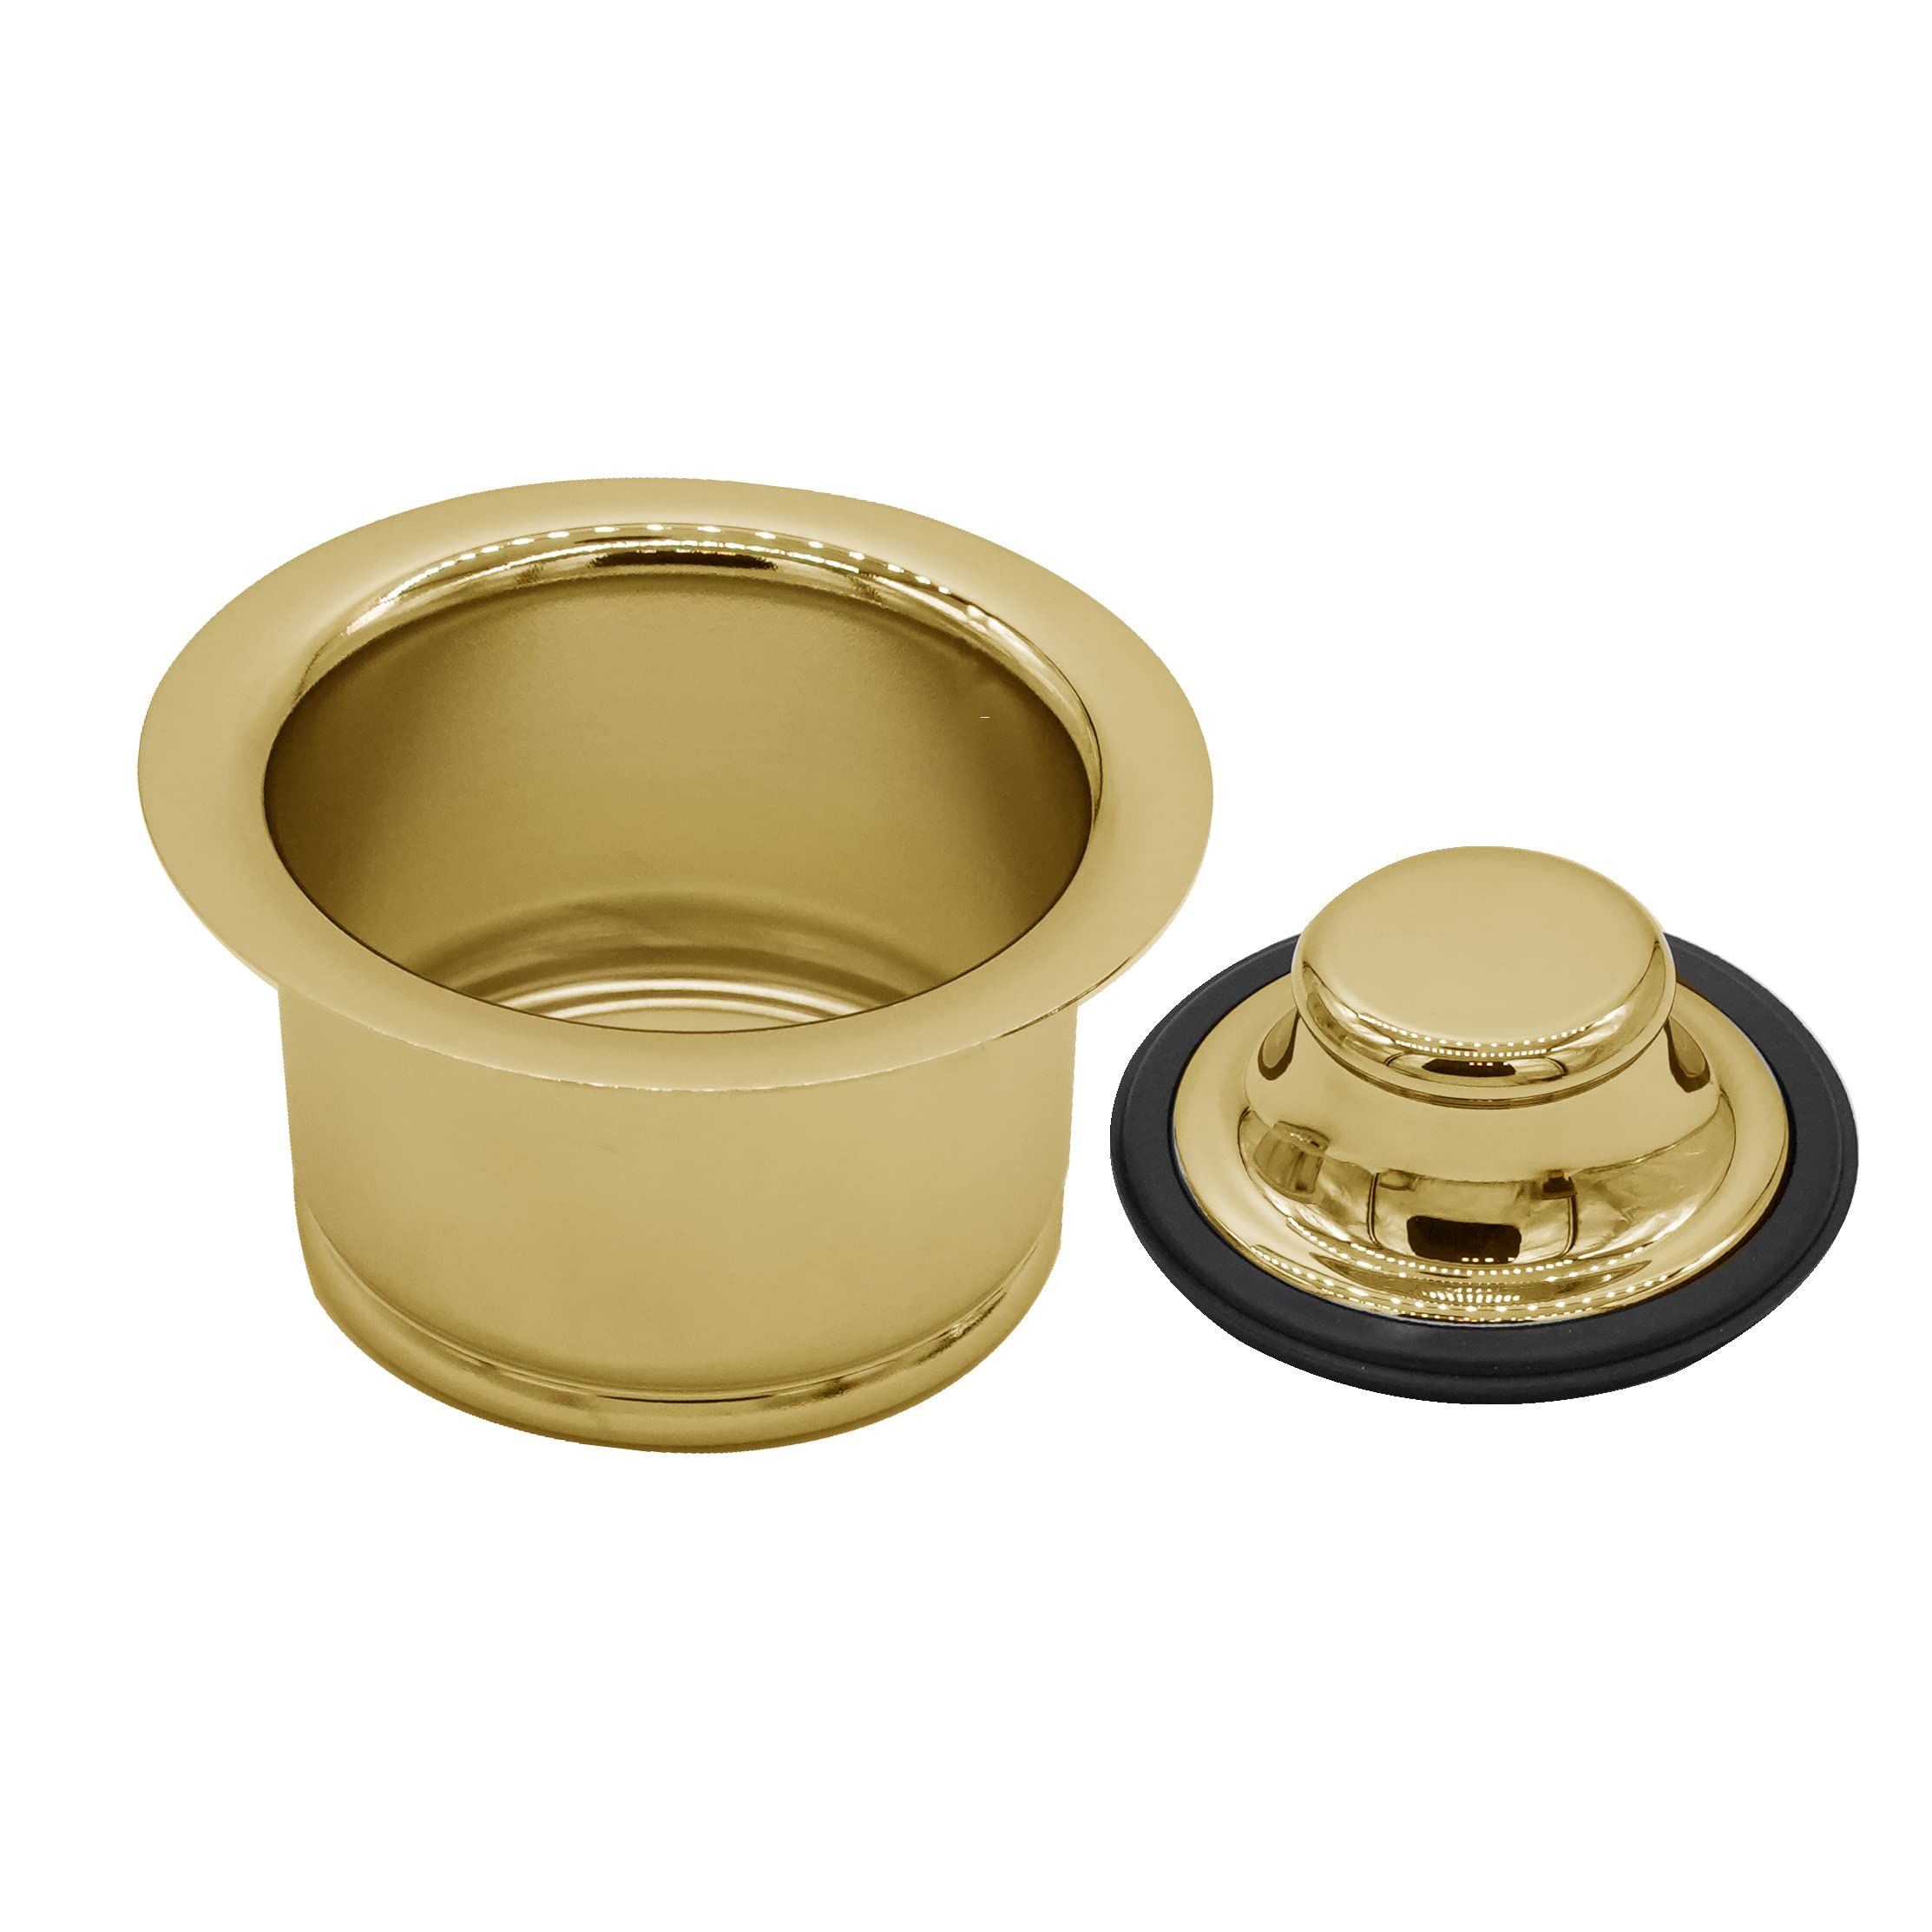 Westbrass CO2196-01 Combo Pack 3-1/2" Post Style Large Basket Strainer and Extra-Deep Collar Kitchen Sink Waste Disposal Flange with Stopper, Polished Brass